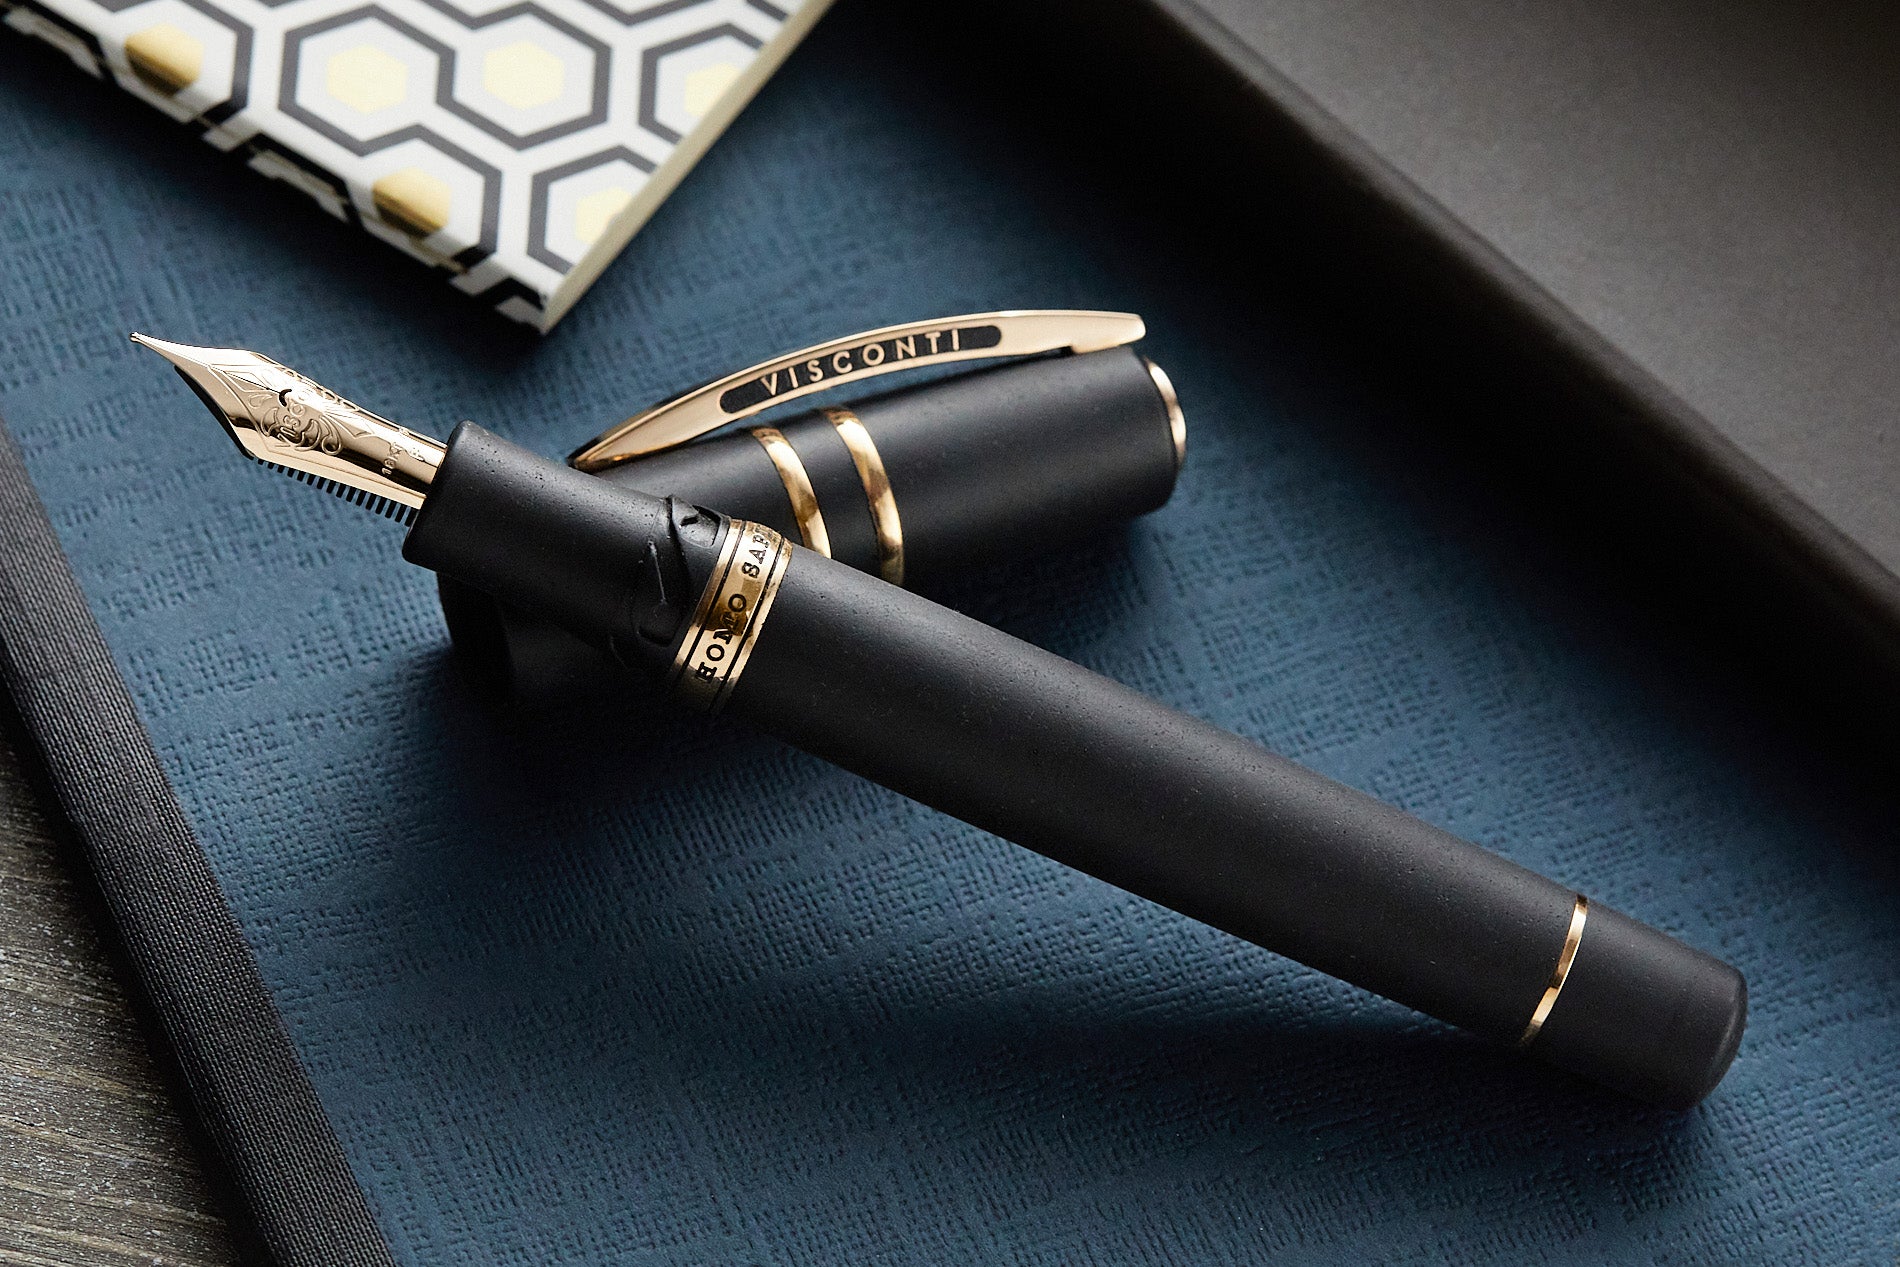 7 Greats and Their Favorite Fountain Pens